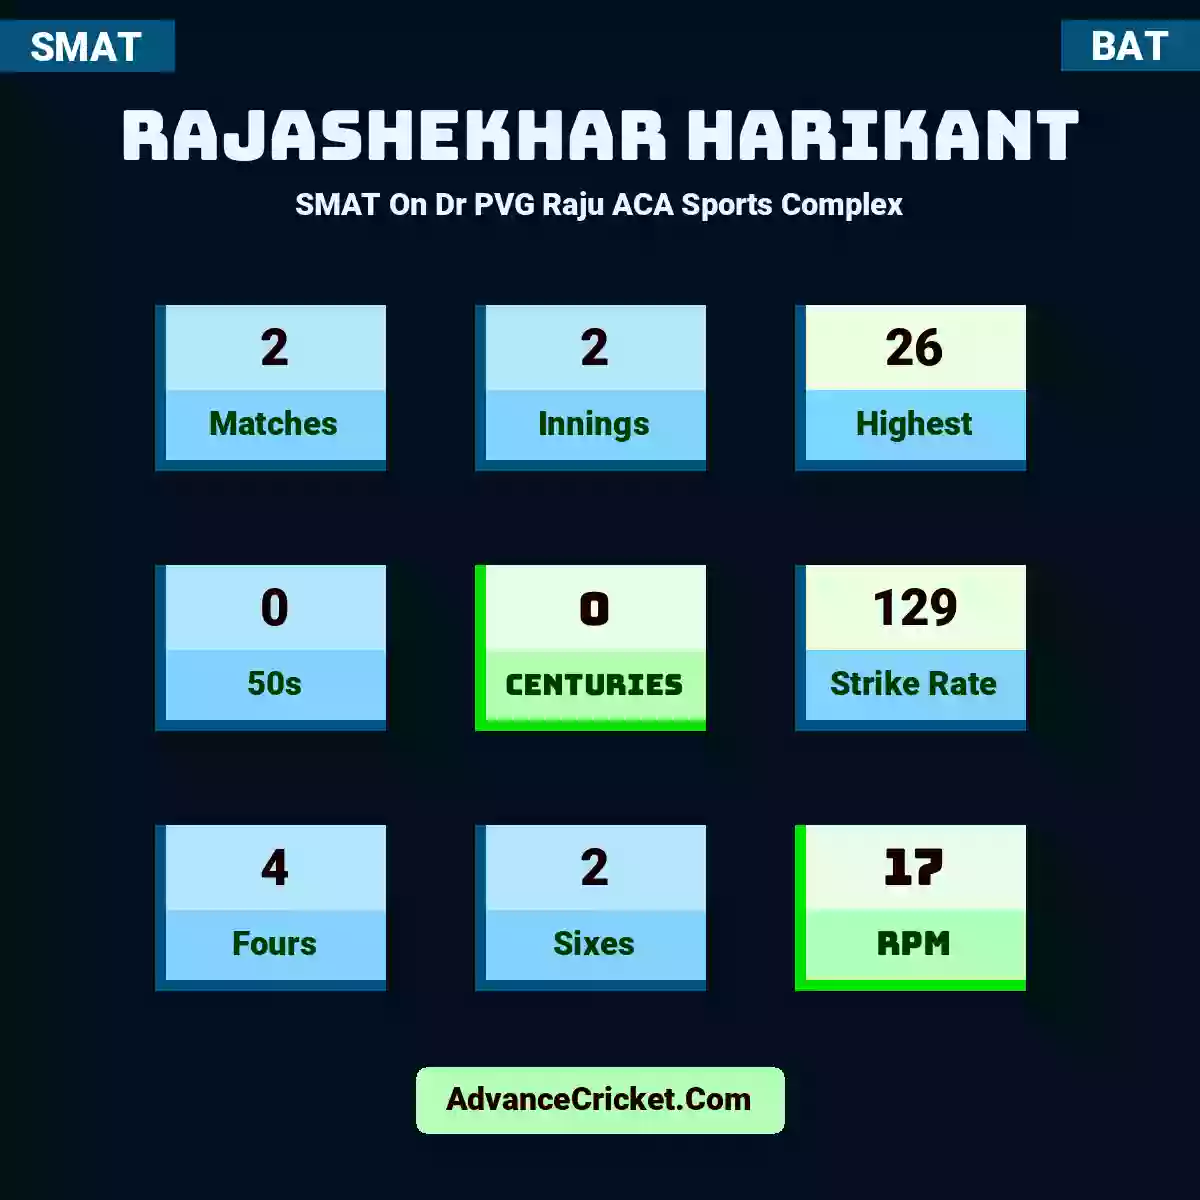 Rajashekhar Harikant SMAT  On Dr PVG Raju ACA Sports Complex, Rajashekhar Harikant played 2 matches, scored 26 runs as highest, 0 half-centuries, and 0 centuries, with a strike rate of 129. R.Harikant hit 4 fours and 2 sixes, with an RPM of 17.